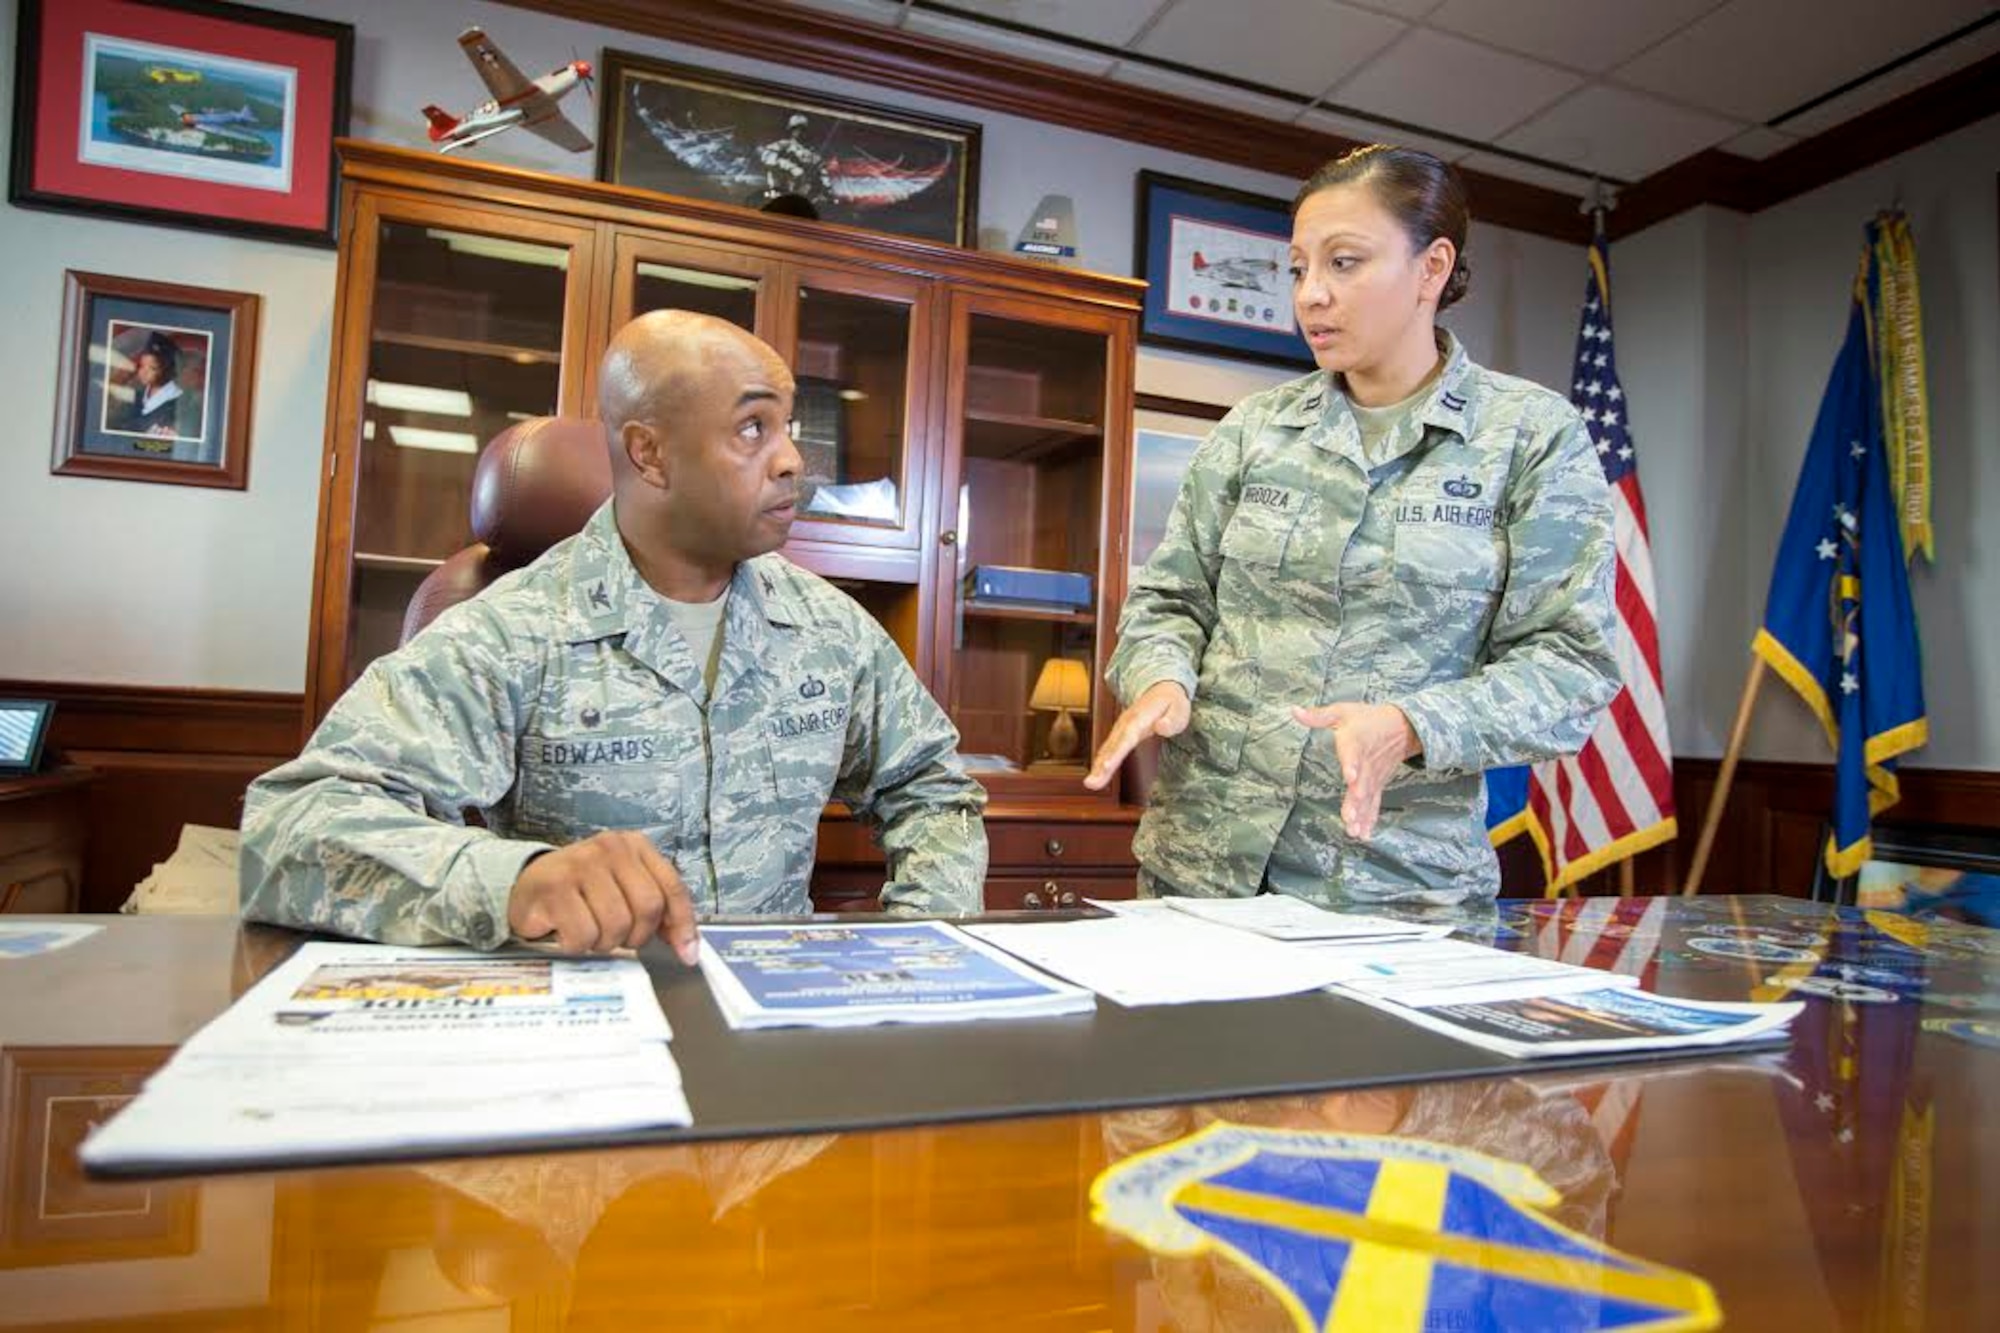 Capt. Monica Verdoza,executive aide to the 37th Training Wing commander, provides Col. Trent Edwards, 37th TRW commander with the morning updates.  Edwards took command of the 37th TRW in June 2014. (U.S. Air Force Photo by Joshua Rodriguez/Released)